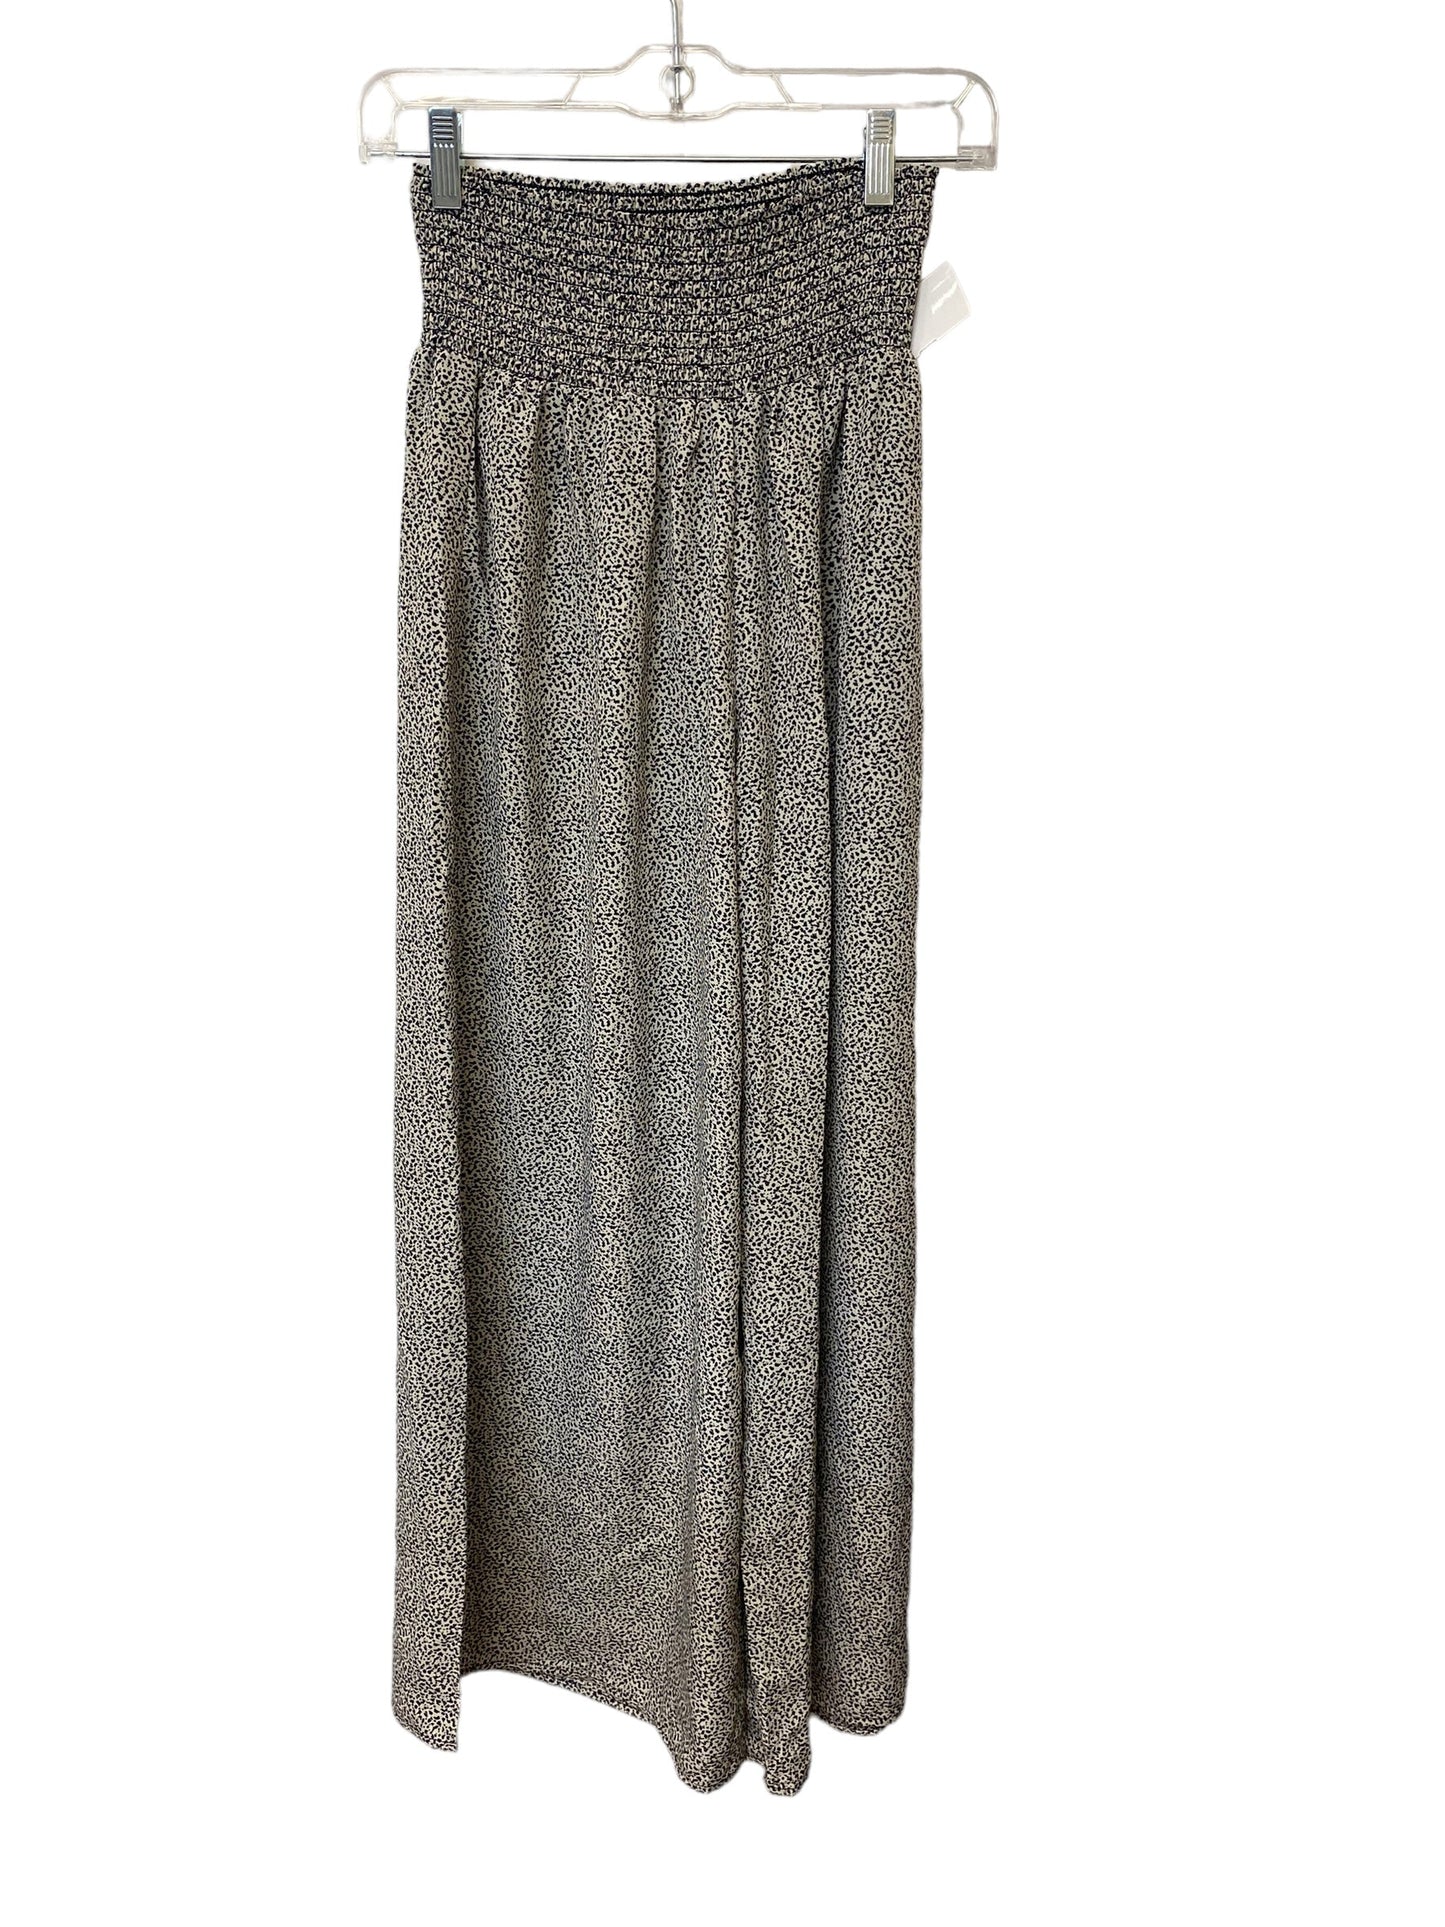 Skirt Maxi By Sienna Sky  Size: M